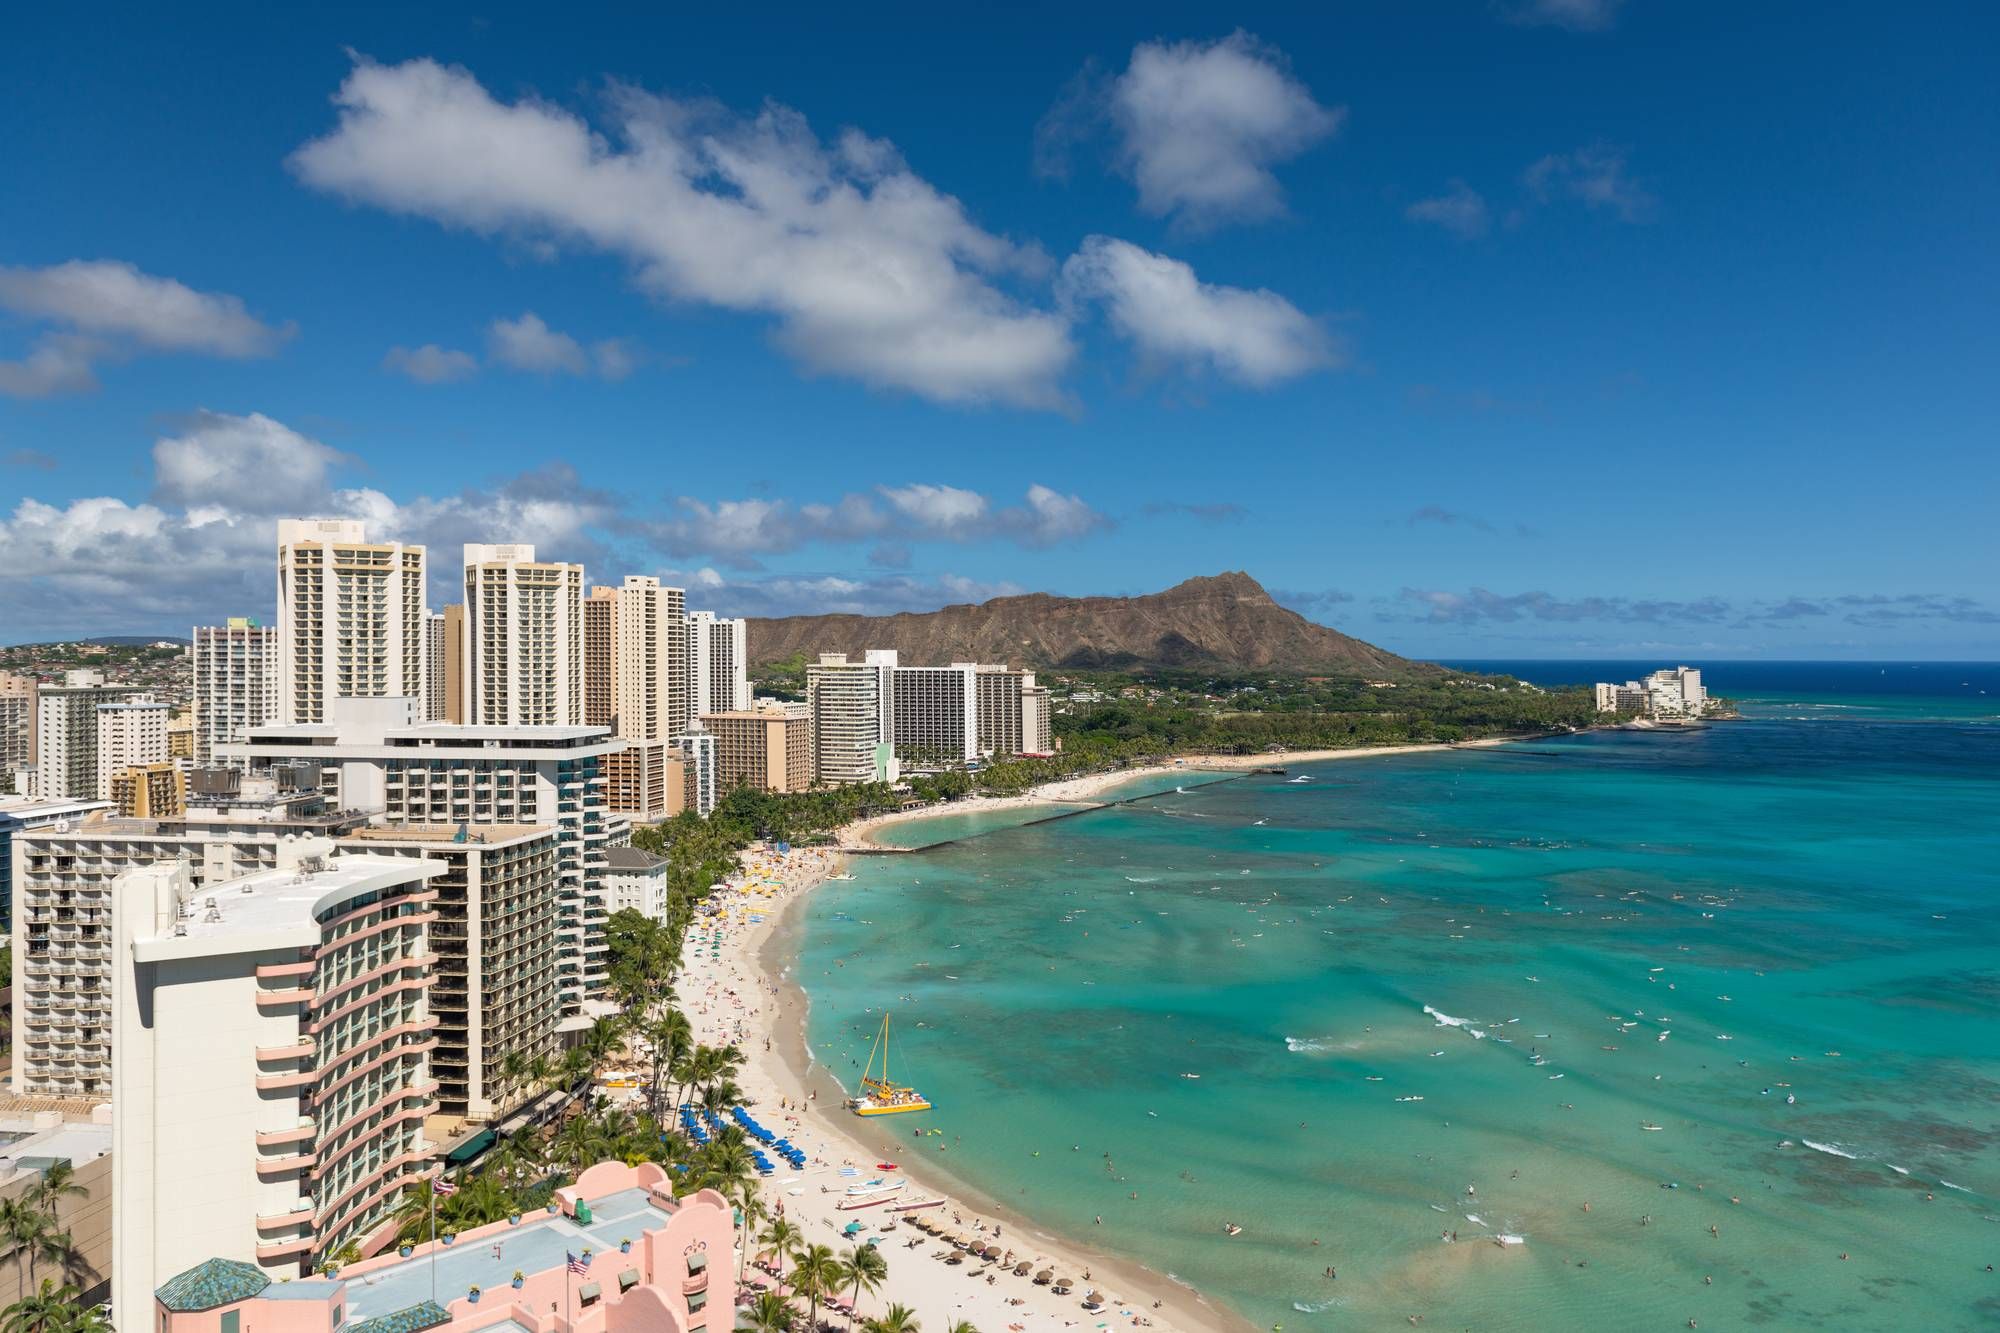 Hawaii property owners may have rentals available on popular beaches.